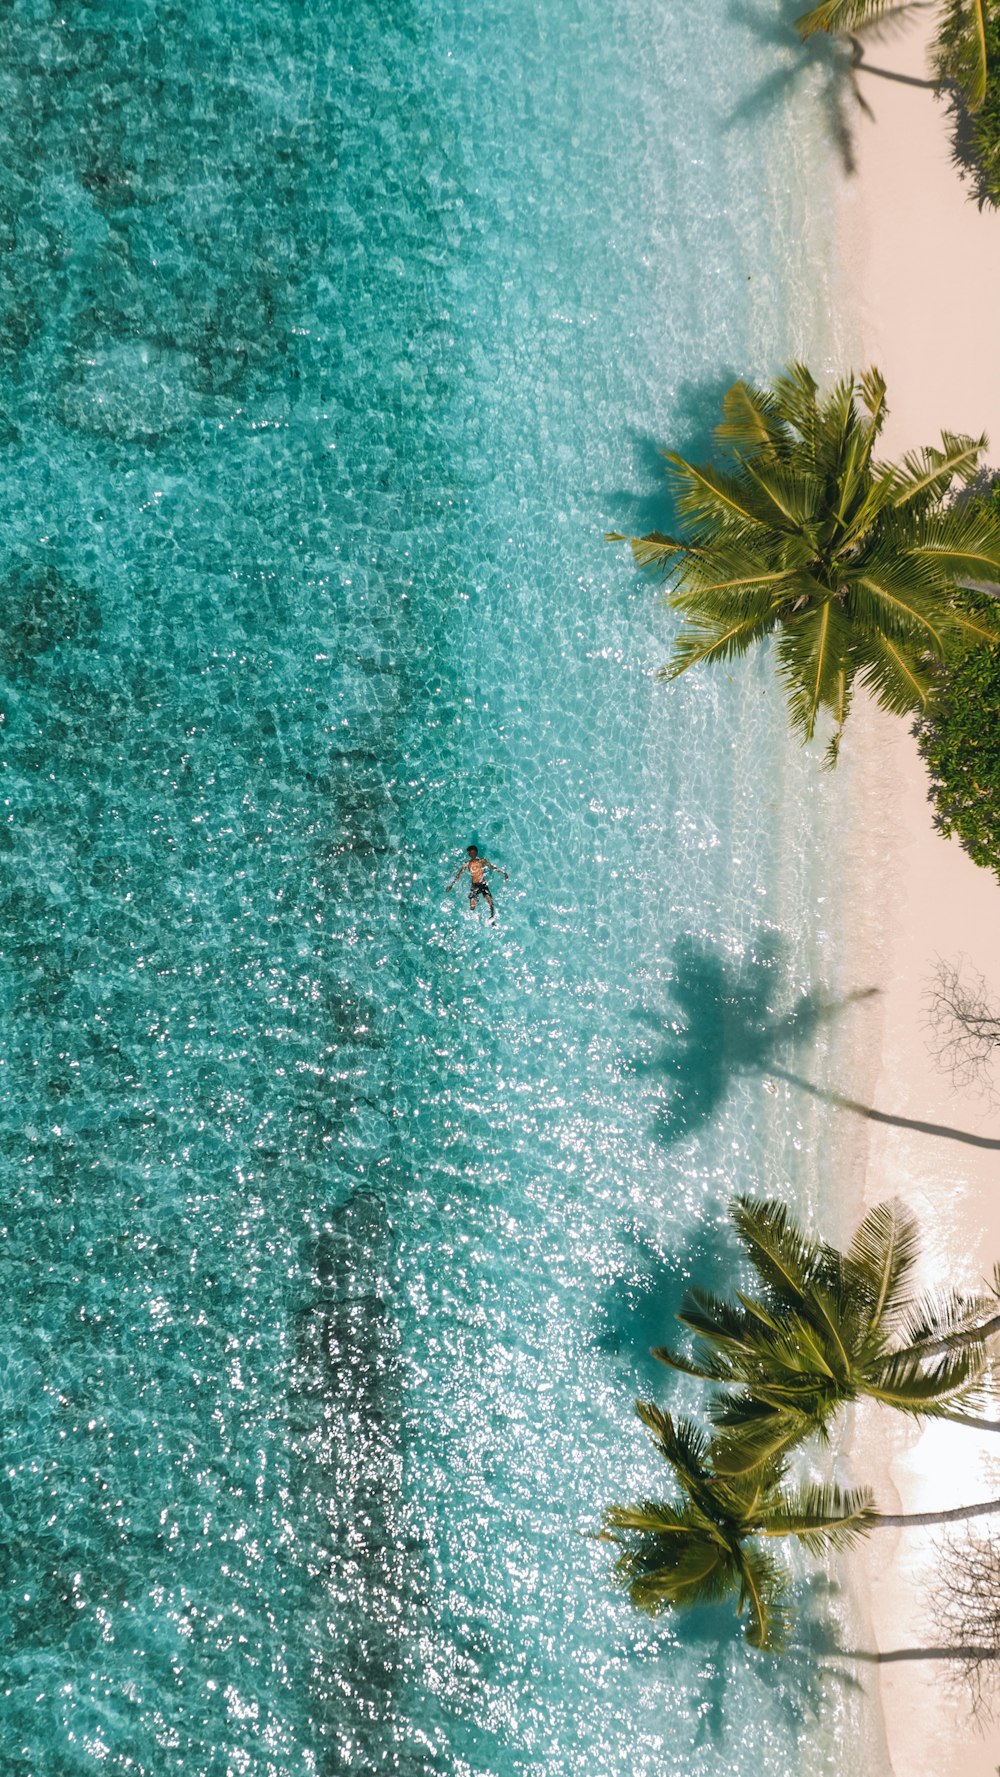 a person in a body of water surrounded by palm trees